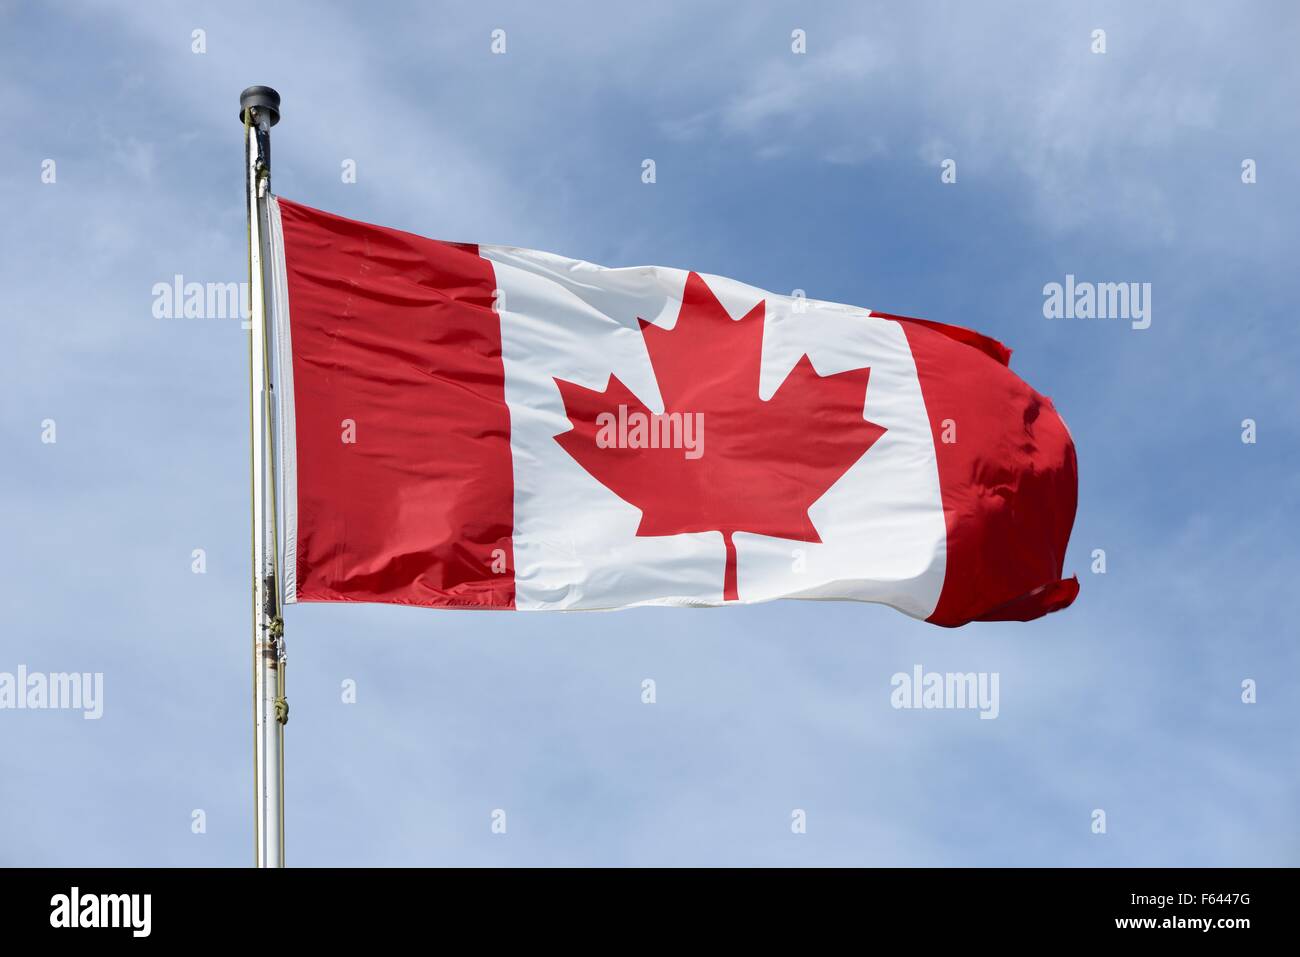 The red and white Canadian maple leaf flag flying on a pole against a blue sky. Stock Photo